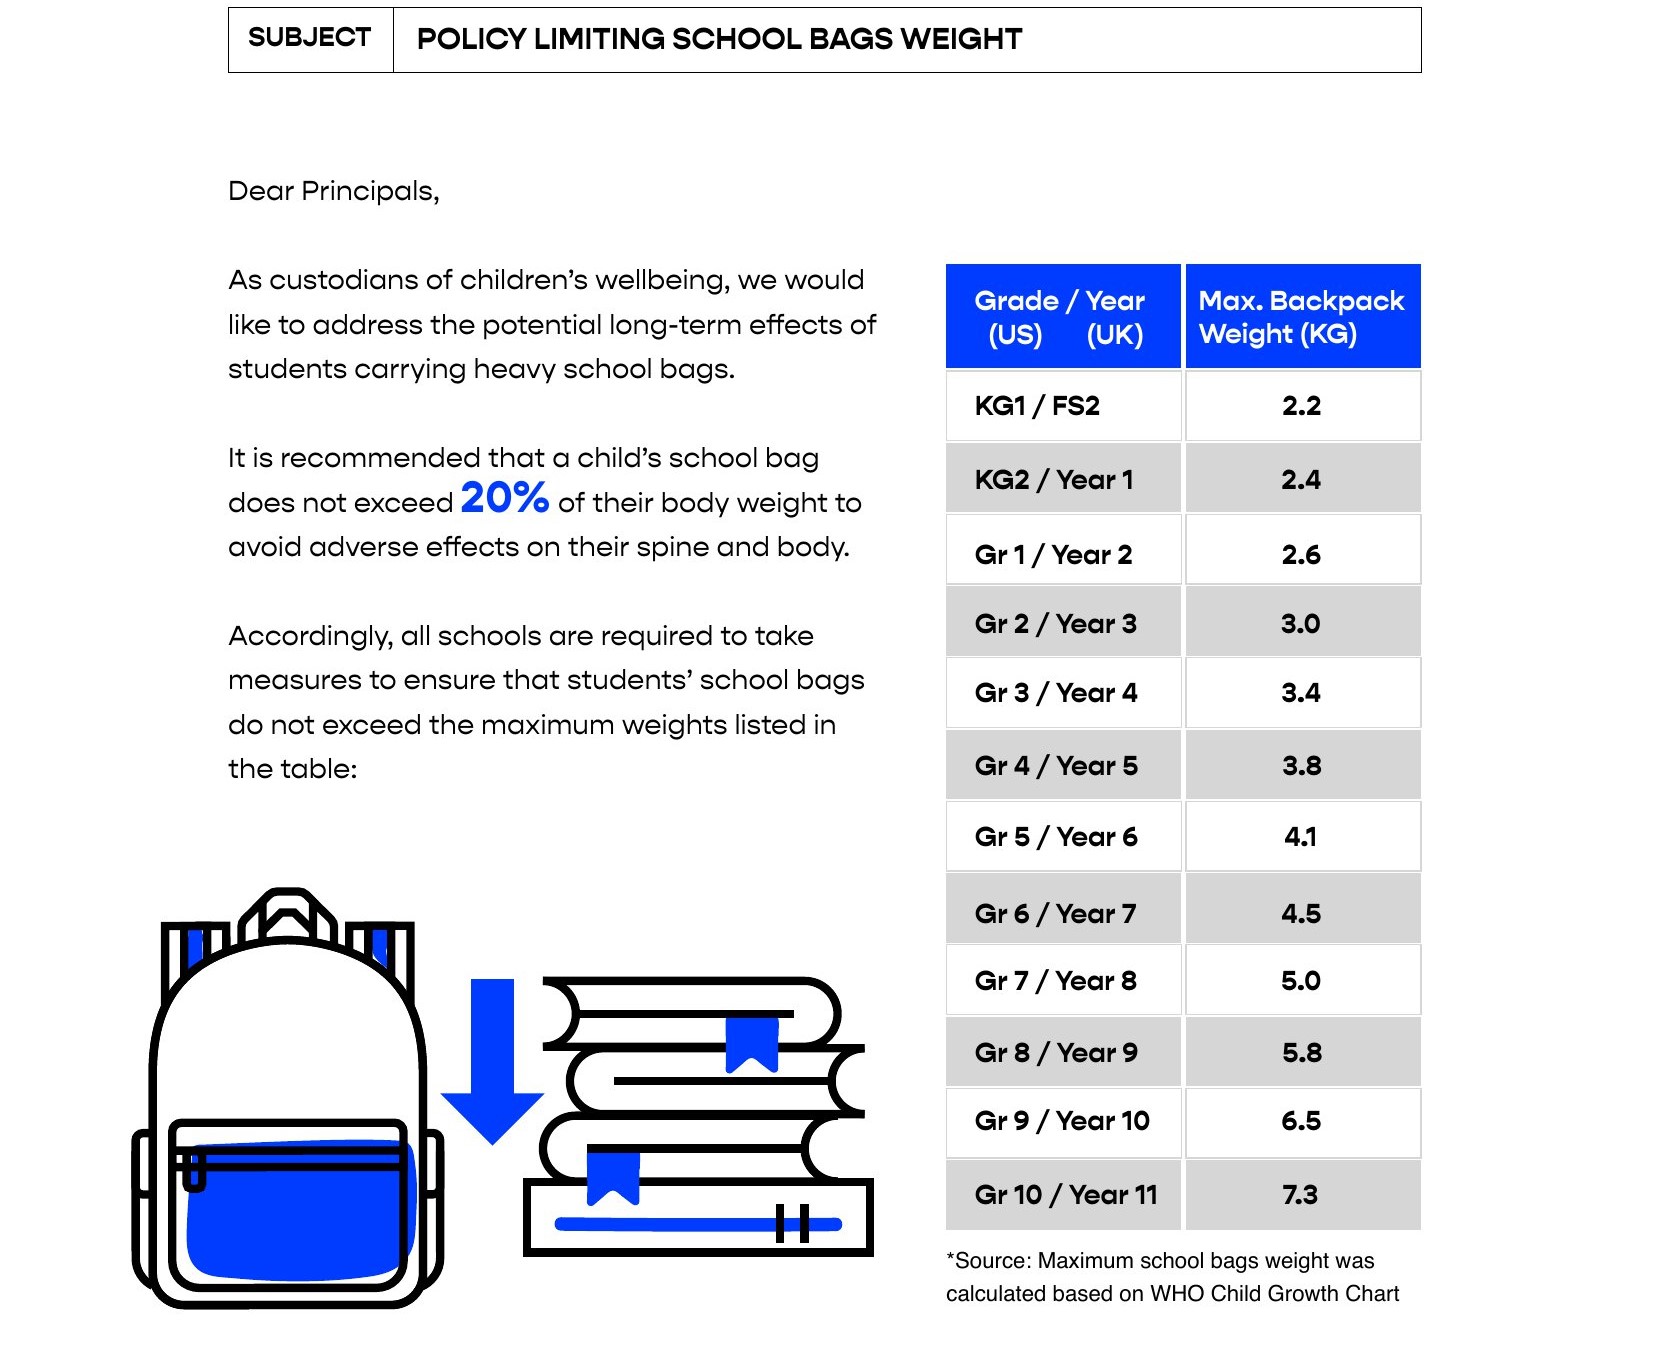 Policy Limiting School Bags Weight